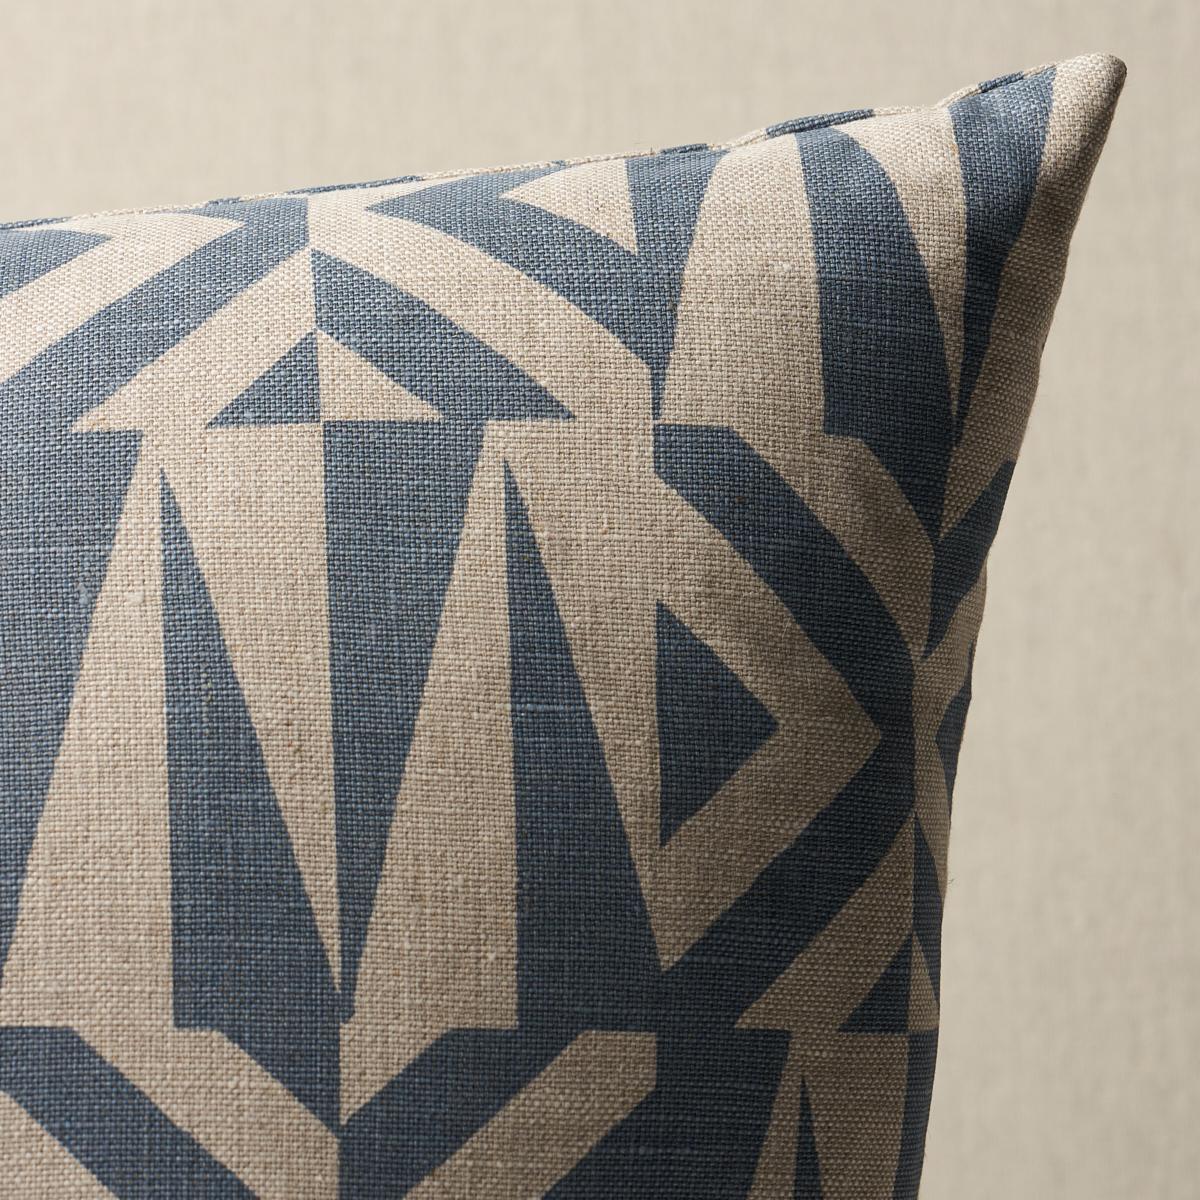 This pillow features Amero with a knife edge finish. A unique offset geometric pattern, Amero is screen-printed by hand on a 100% linen ground. Pillow includes a feather/down fill insert and hidden zipper closure.
